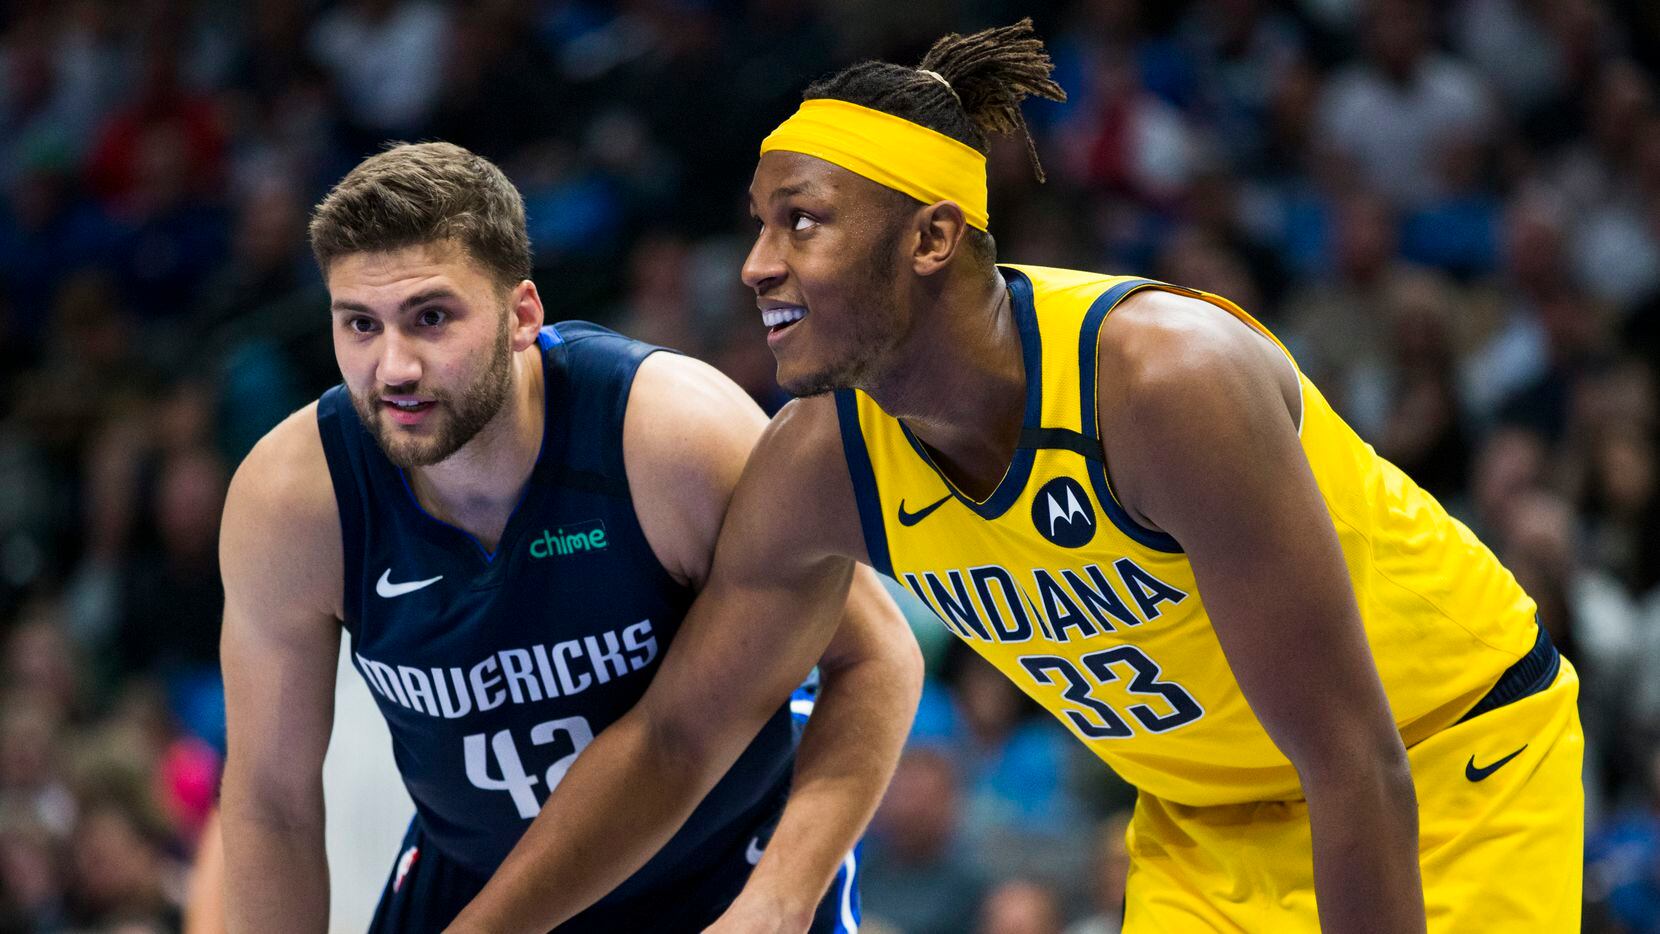 Dallas Mavericks forward Maxi Kleber (42) and Indiana Pacers center Myles Turner (33) looks for a rebound during the second quarter of an NBA game between the Indiana Pacers and the Dallas Mavericks on Sunday, March 8, 2020 at American Airlines Center in Dallas.